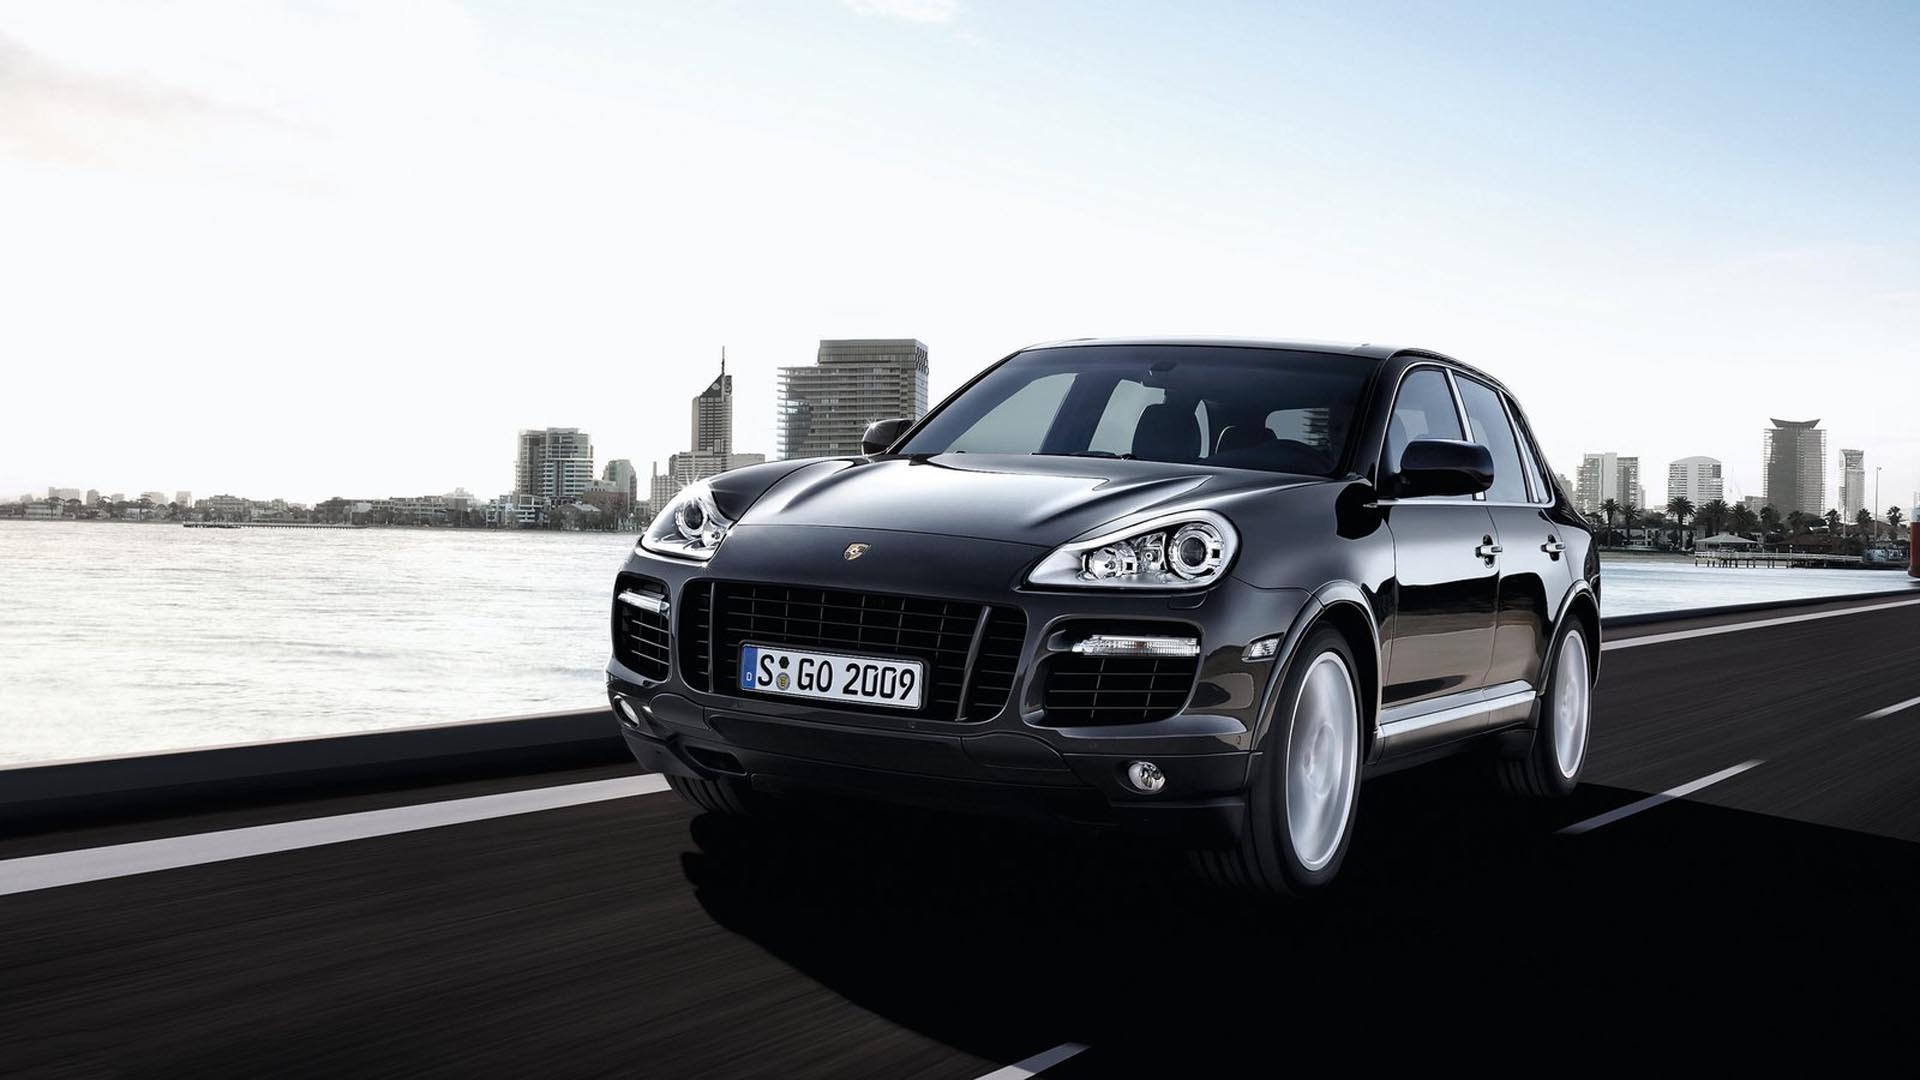 Is The Porsche Cayenne Reliable?